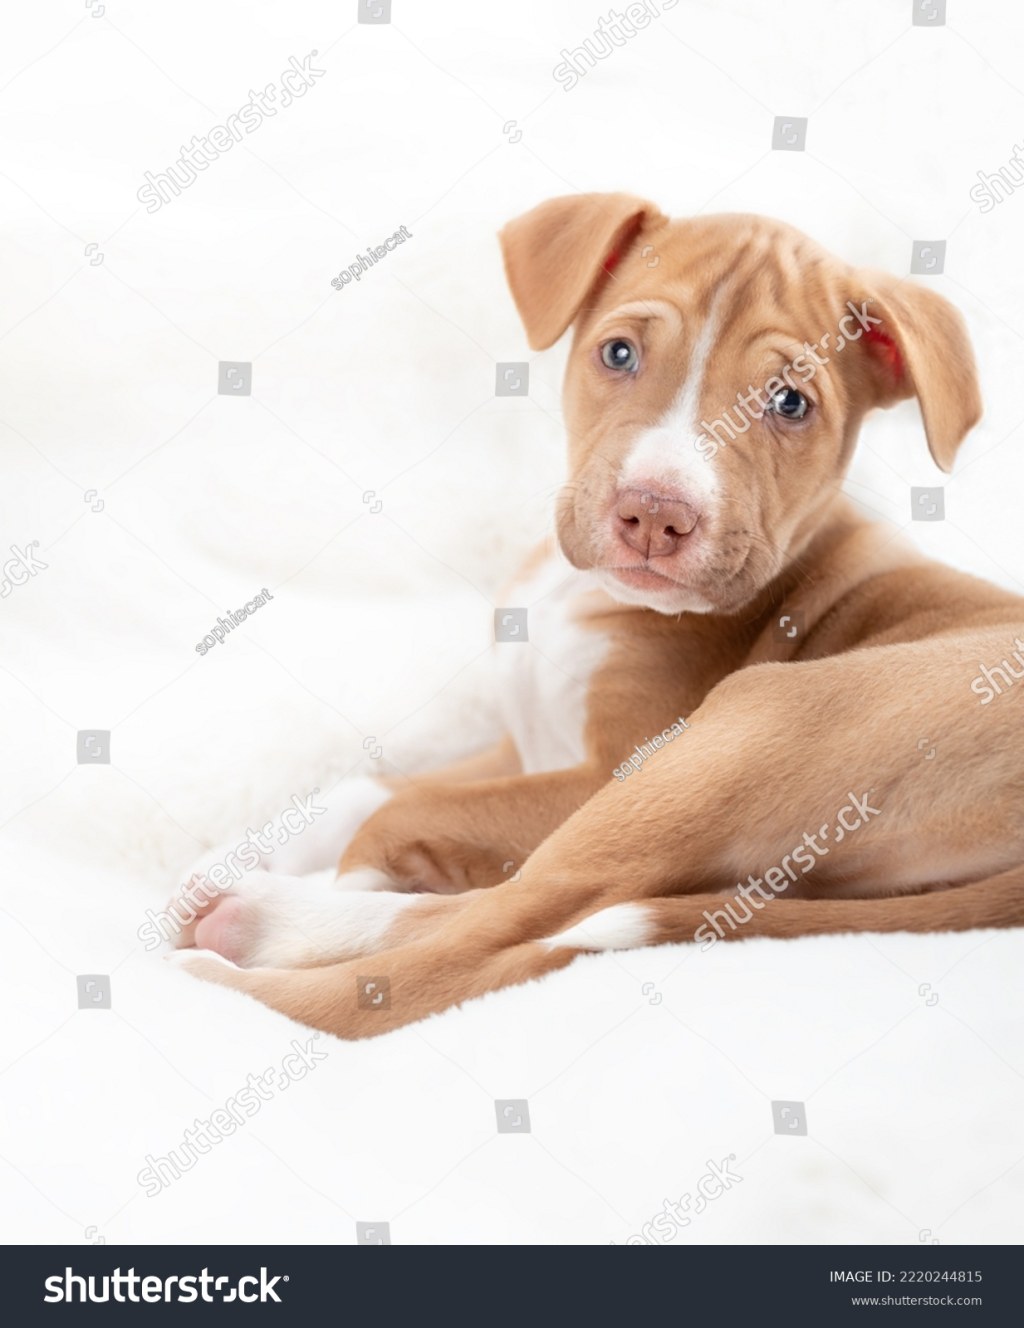 Picture of: Blonde Pitbull Images, Stock Photos & Vectors  Shutterstock